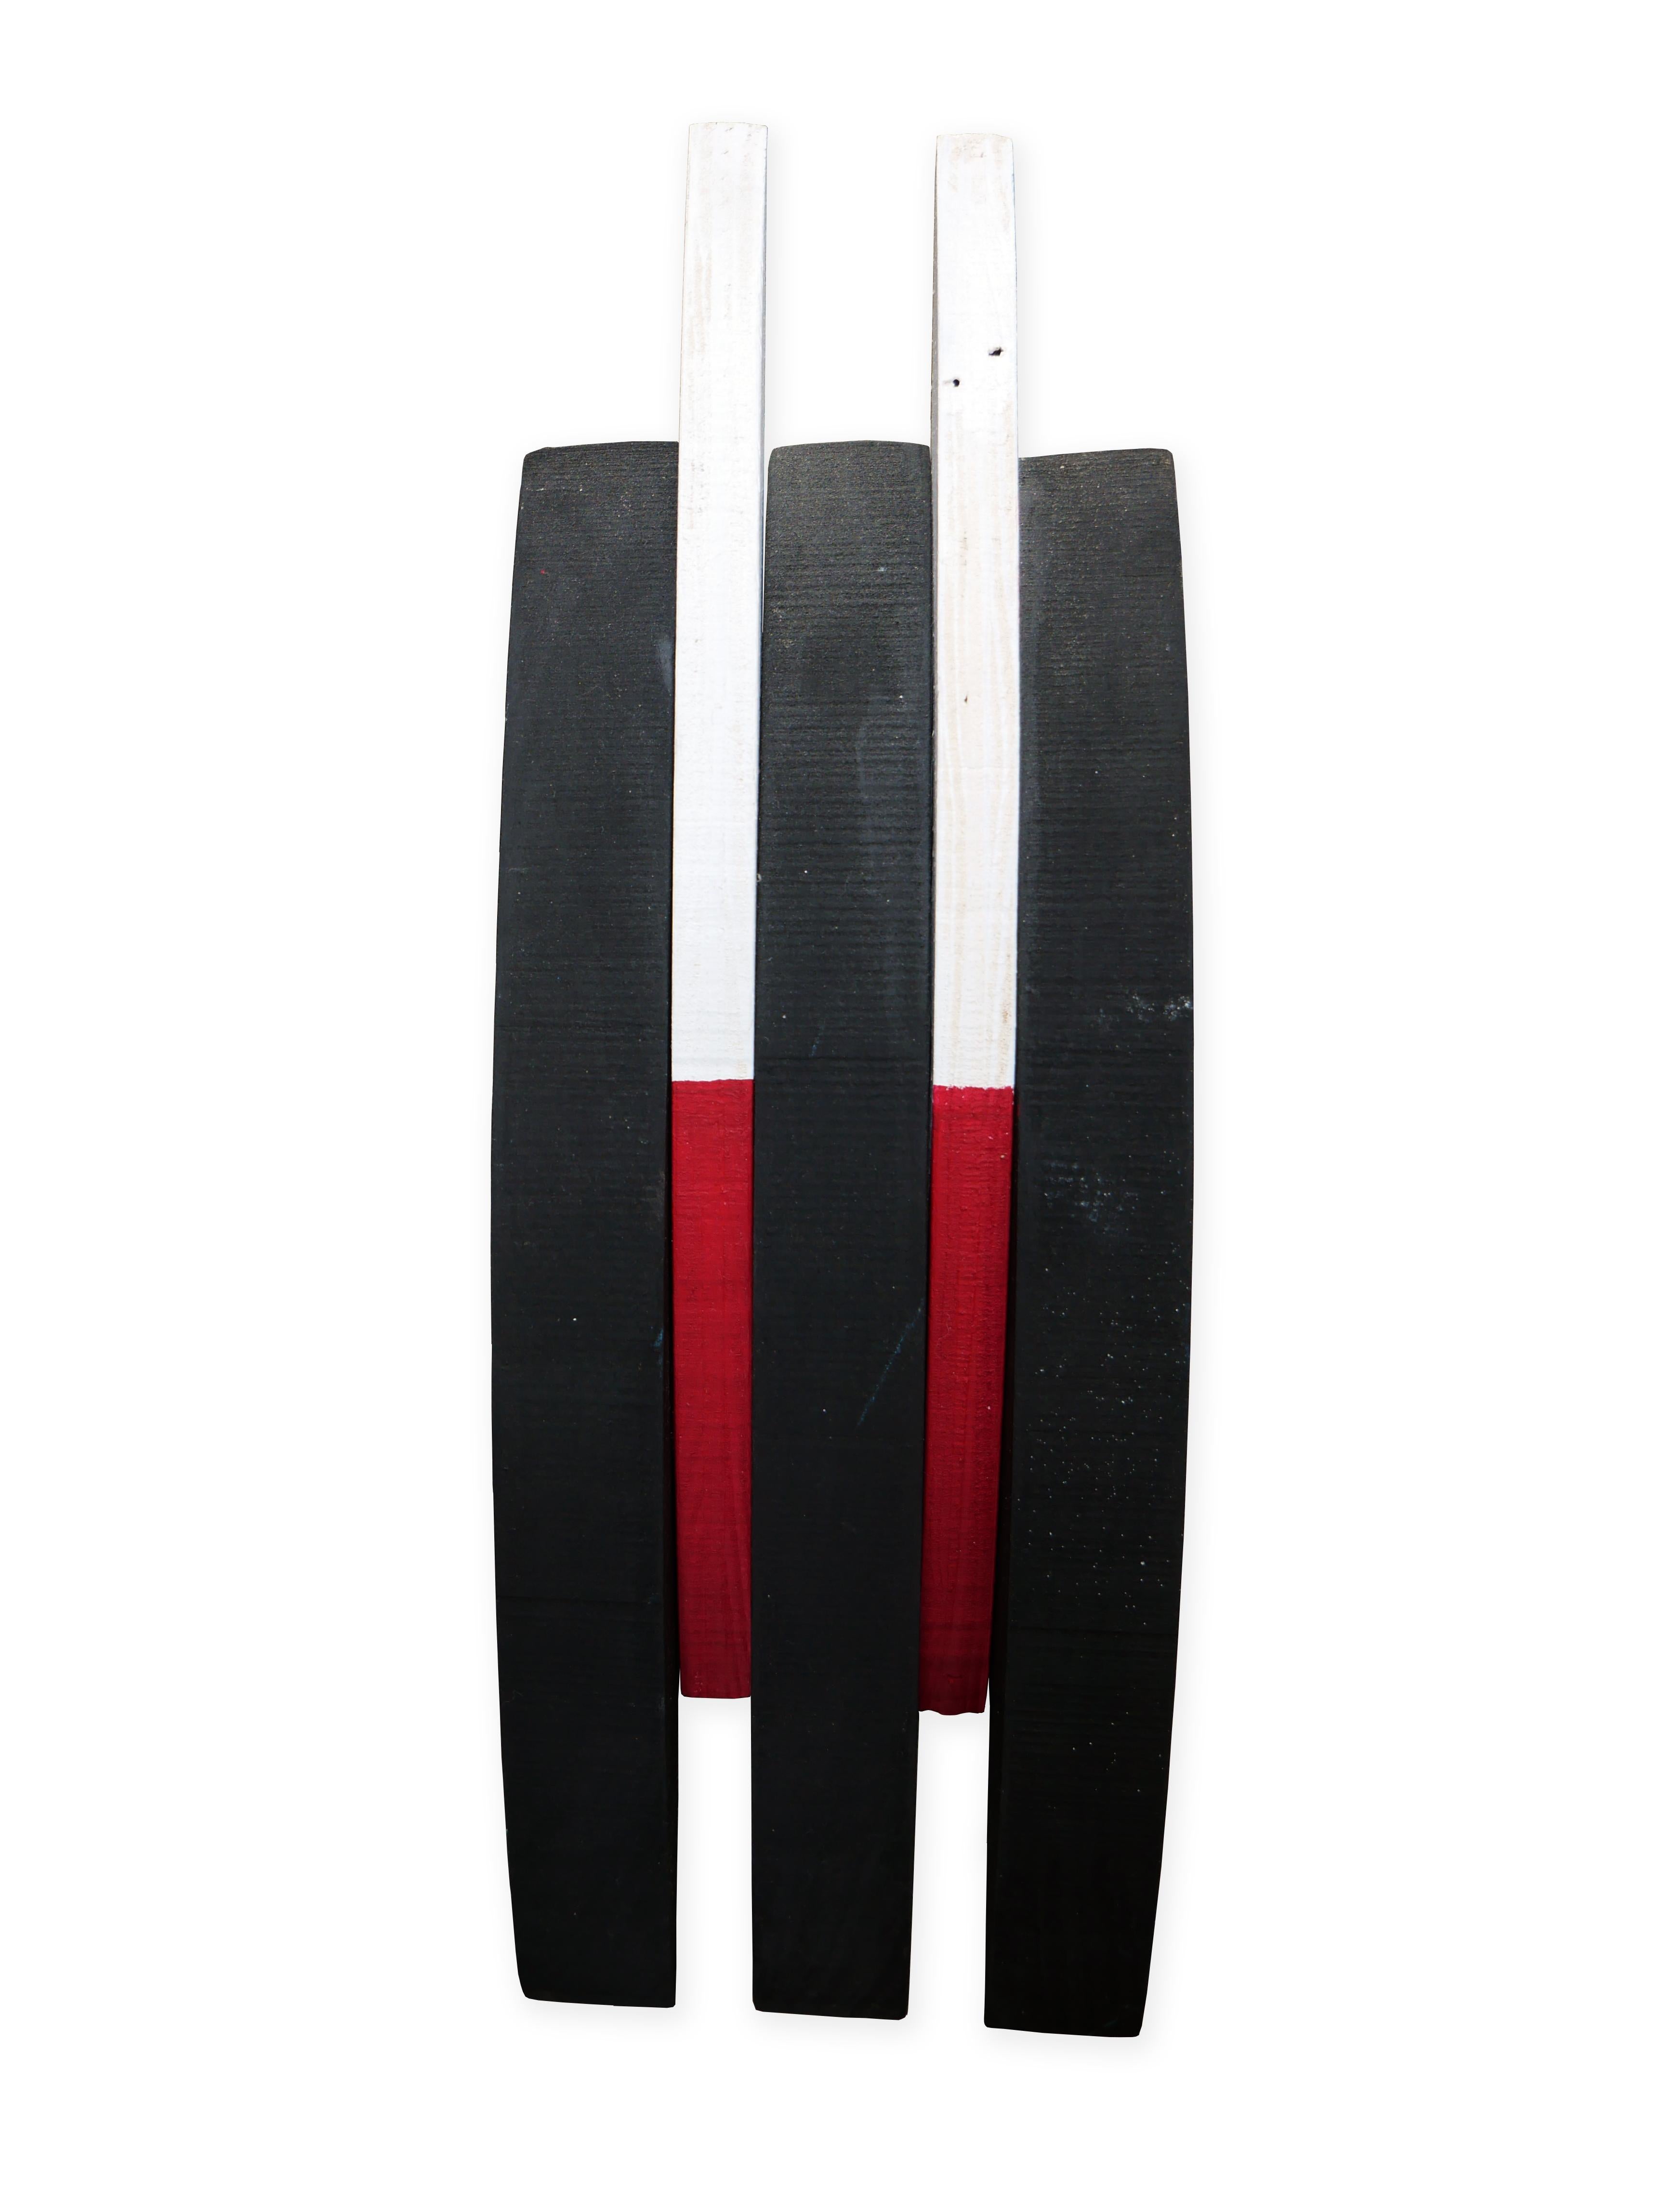 Scott Woodard Figurative Painting - “Minimal 5” Red, White, and Black Geometric Abstract Wooden Sculpture